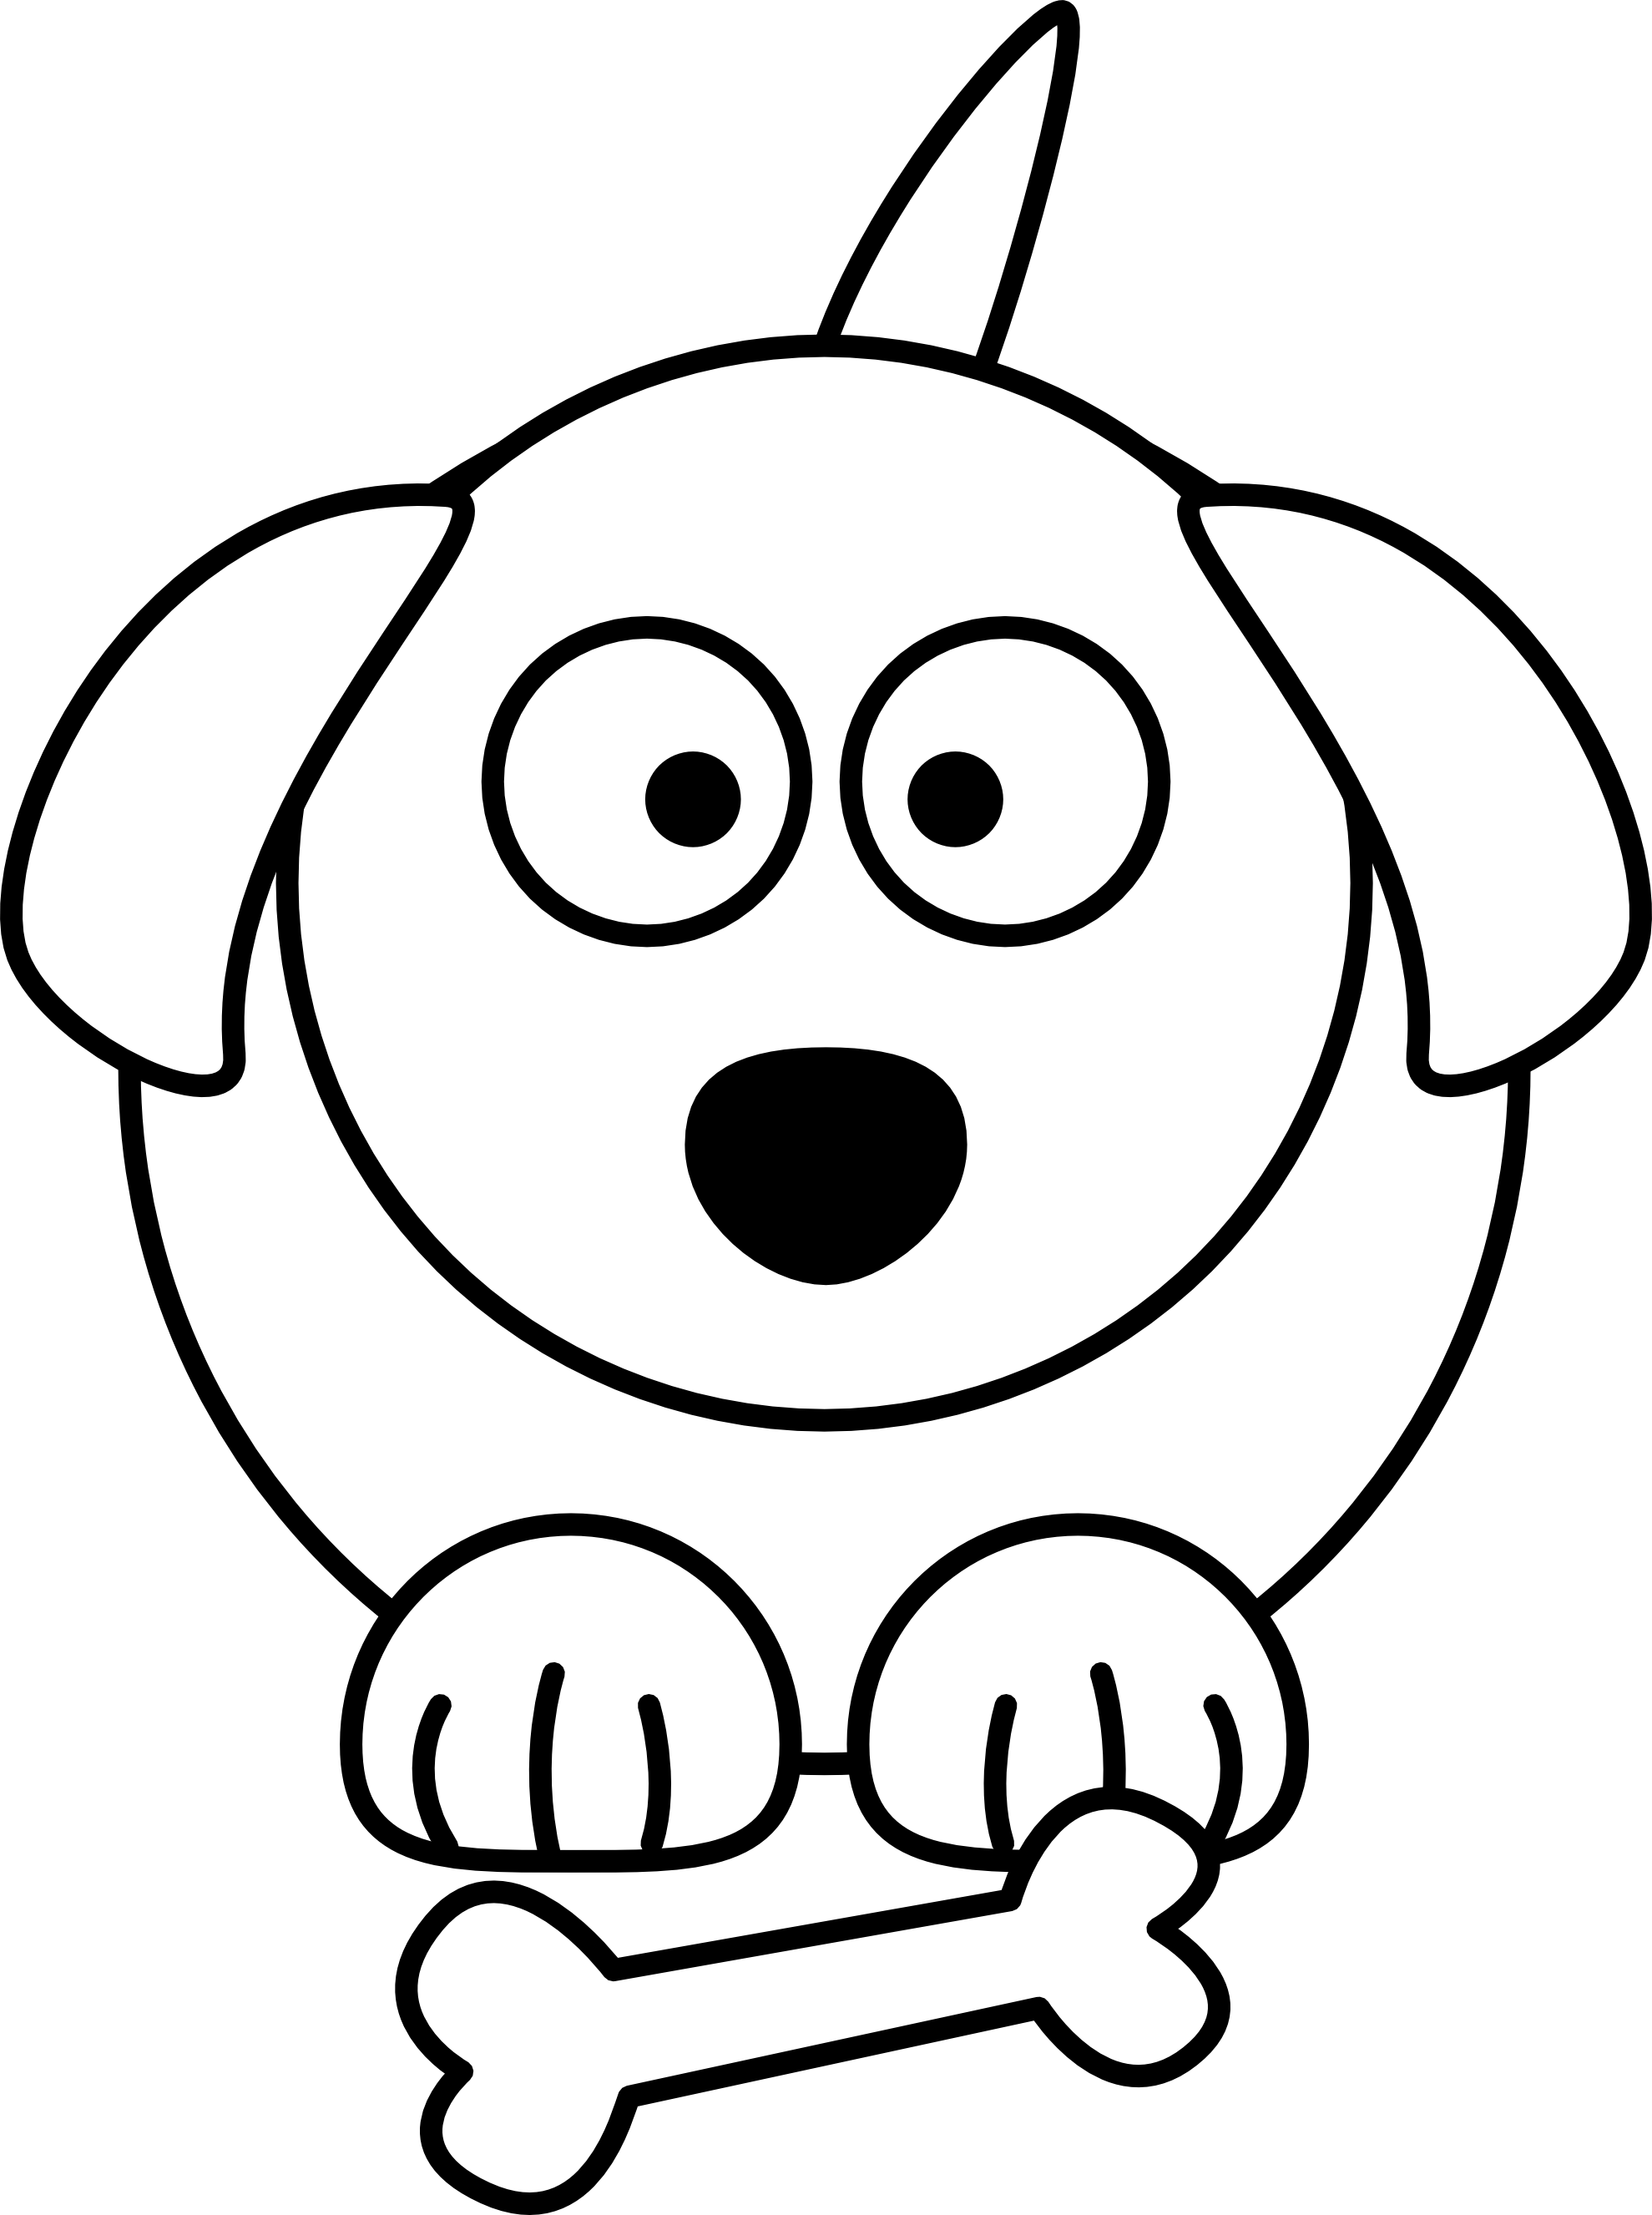 Black And White Dog Images - Clipart library